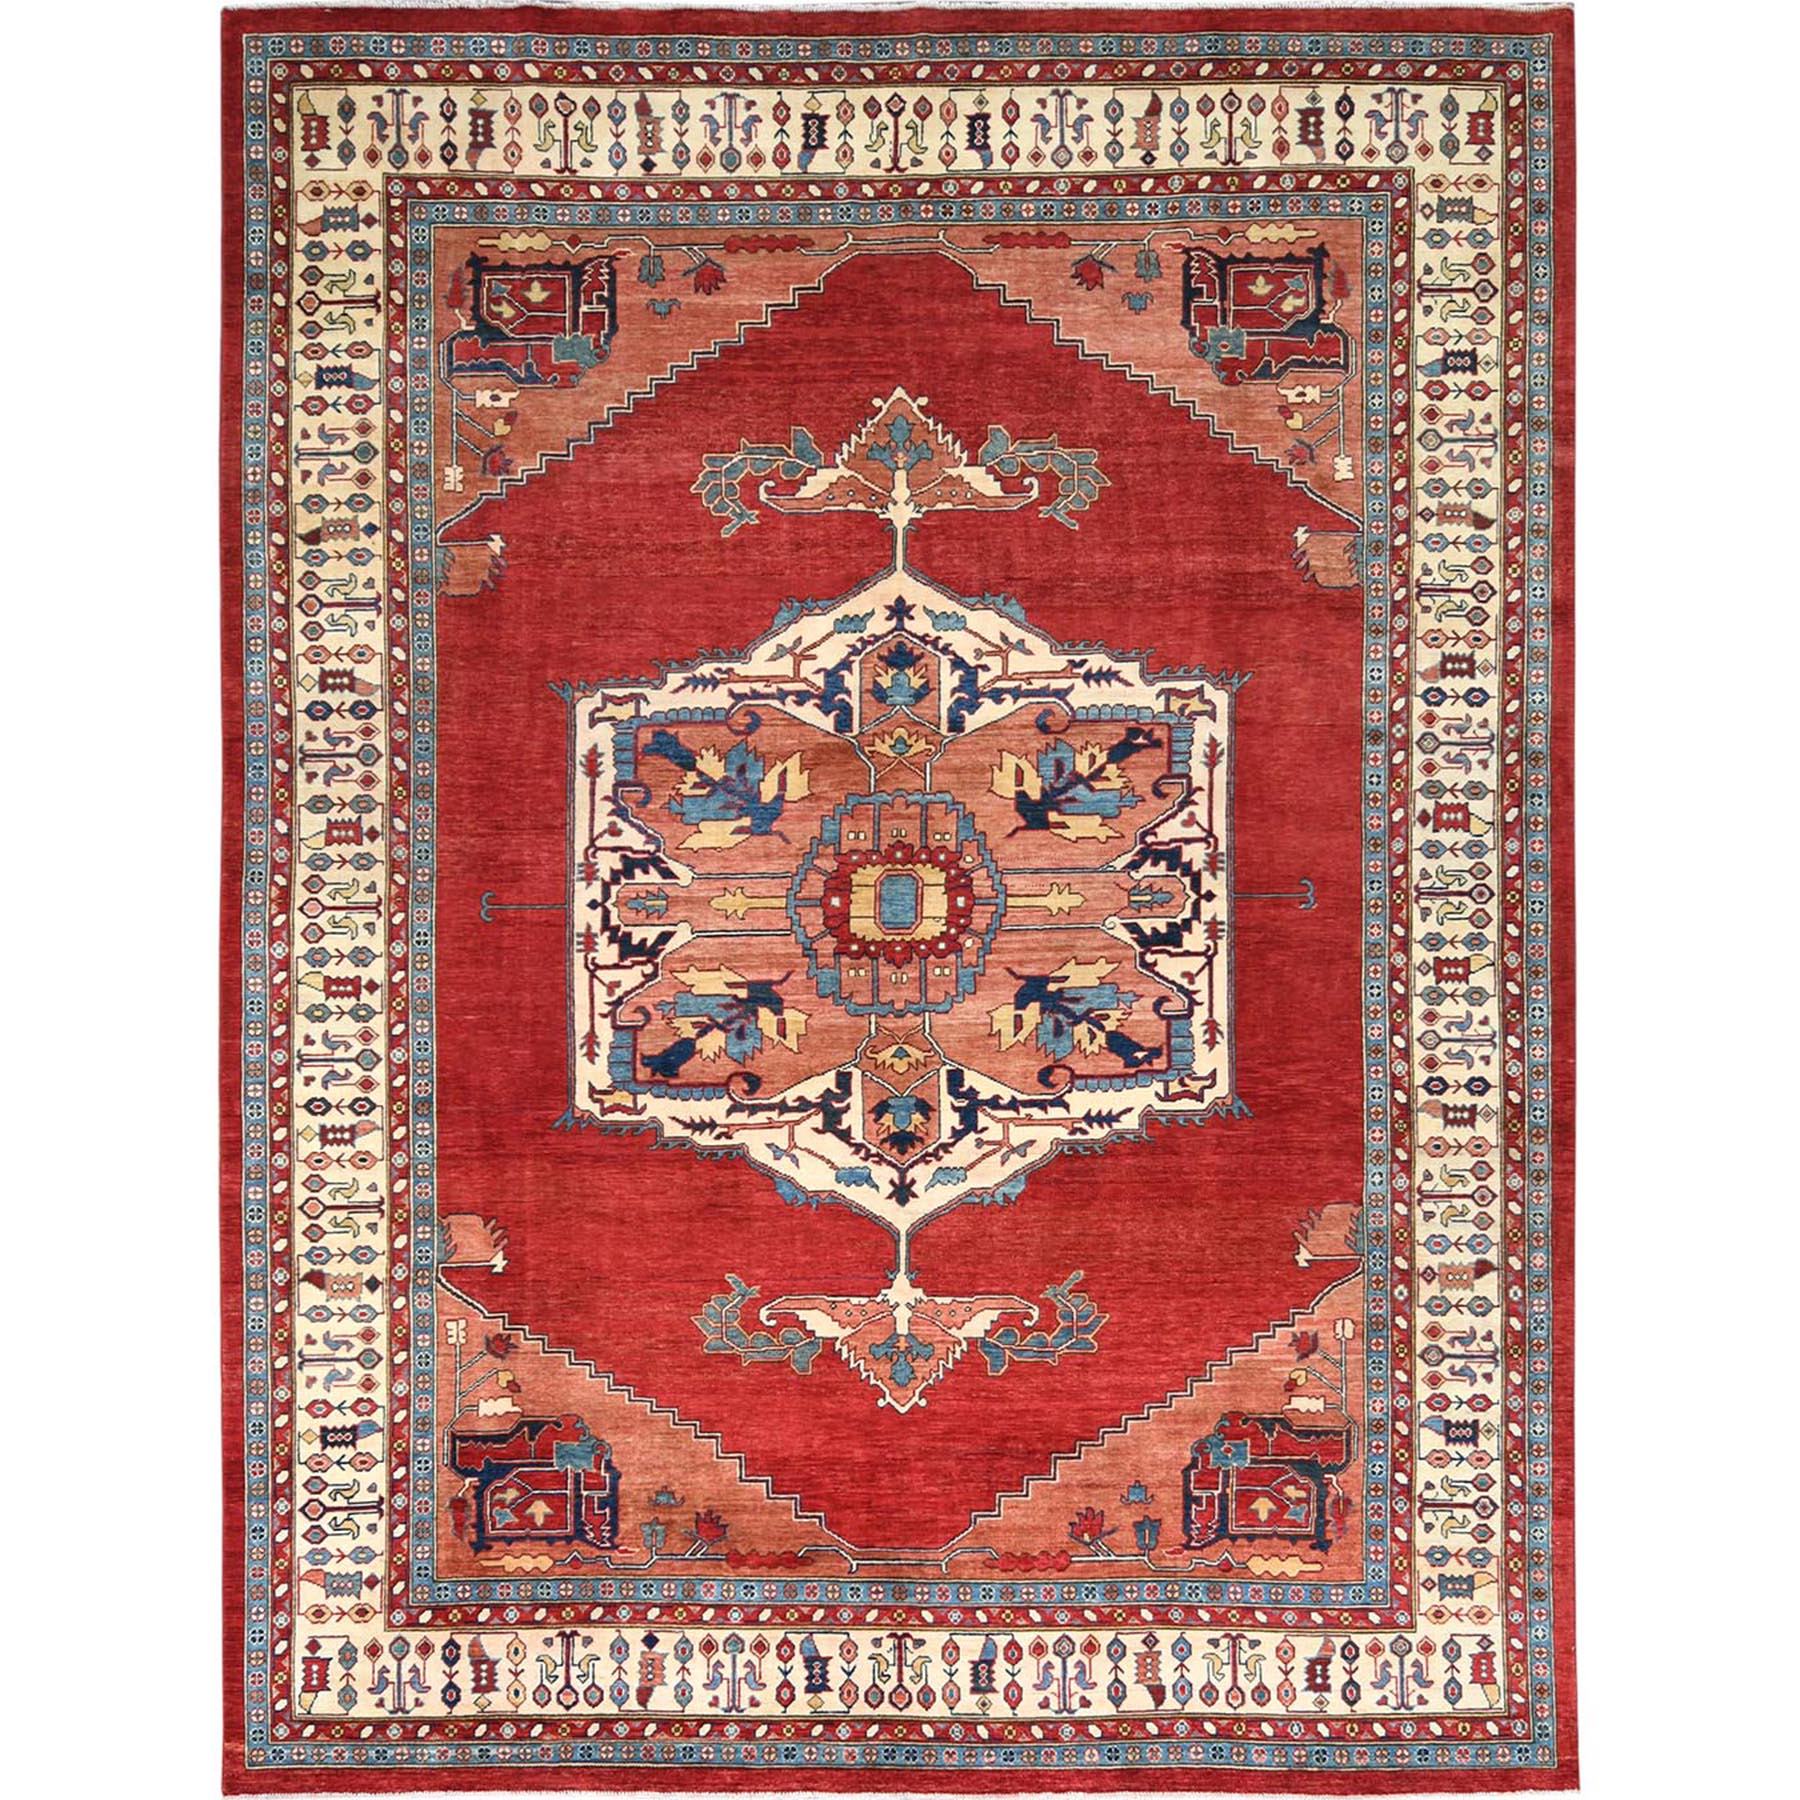  Wool Hand-Knotted Area Rug 9'0